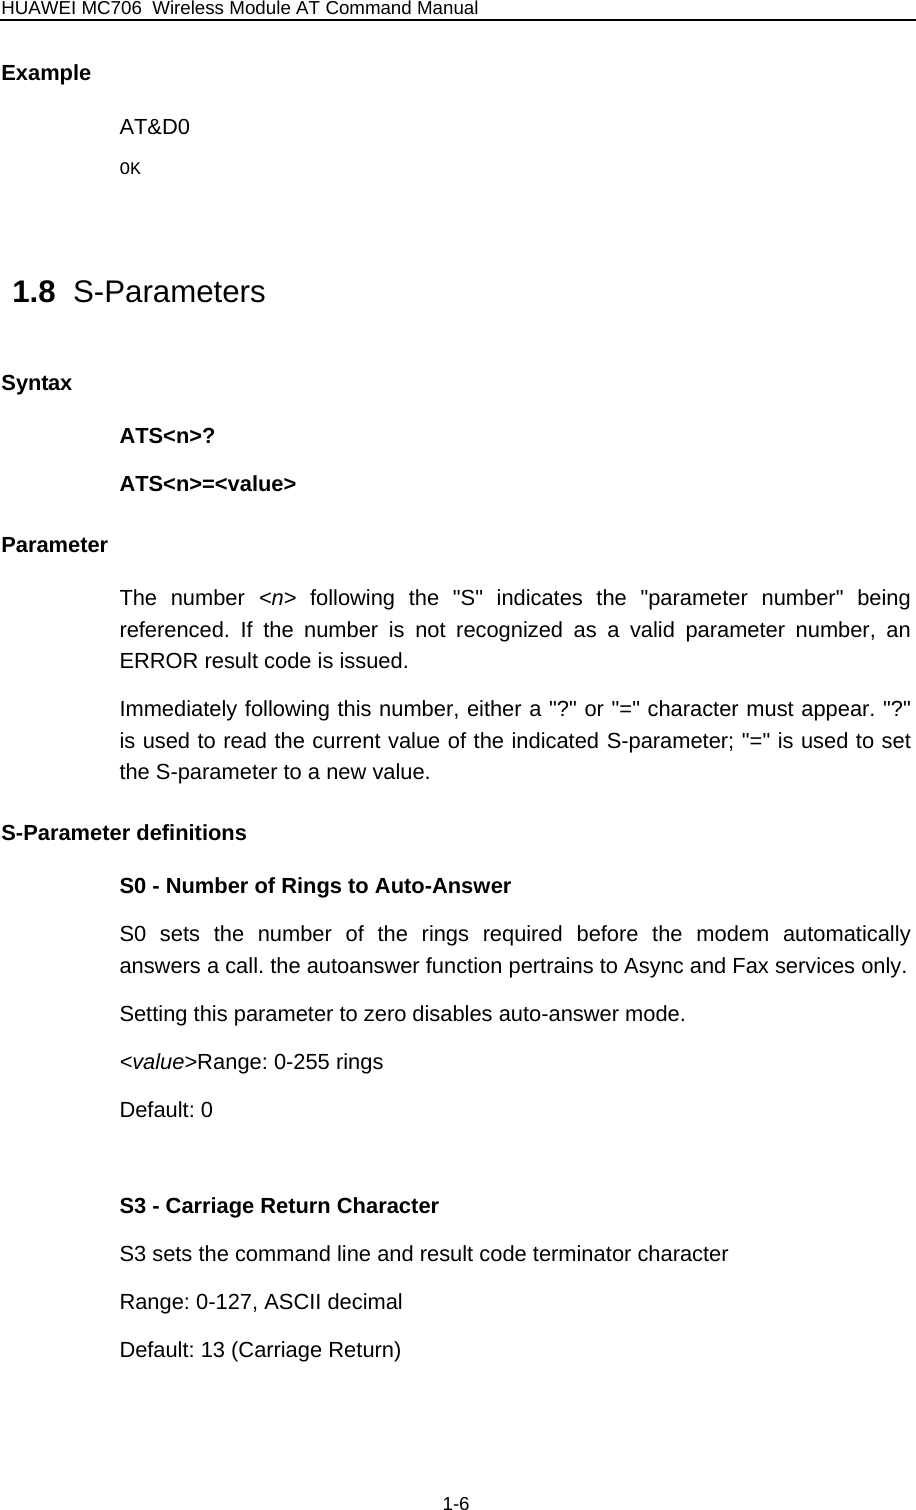 HUAWEI MC706 Wireless Module AT Command Manual Example AT&amp;D0 OK  1.8  S-Parameters Syntax ATS&lt;n&gt;? ATS&lt;n&gt;=&lt;value&gt; Parameter The number &lt;n&gt;  following the &quot;S&quot; indicates the &quot;parameter number&quot; being referenced. If the number is not recognized as a valid parameter number, an ERROR result code is issued. Immediately following this number, either a &quot;?&quot; or &quot;=&quot; character must appear. &quot;?&quot; is used to read the current value of the indicated S-parameter; &quot;=&quot; is used to set the S-parameter to a new value. S-Parameter definitions S0 - Number of Rings to Auto-Answer S0 sets the number of the rings required before the modem automatically answers a call. the autoanswer function pertrains to Async and Fax services only. Setting this parameter to zero disables auto-answer mode. &lt;value&gt;Range: 0-255 rings Default: 0  S3 - Carriage Return Character S3 sets the command line and result code terminator character Range: 0-127, ASCII decimal Default: 13 (Carriage Return)  1-6 